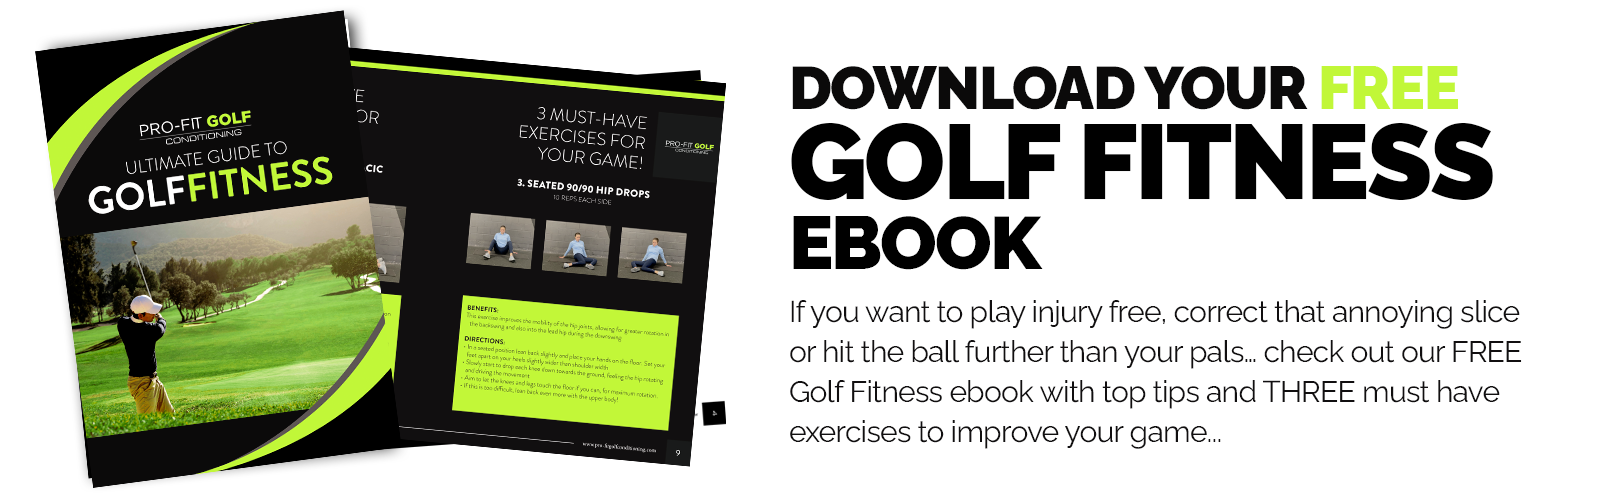 Pro-fit Golf Conditioning